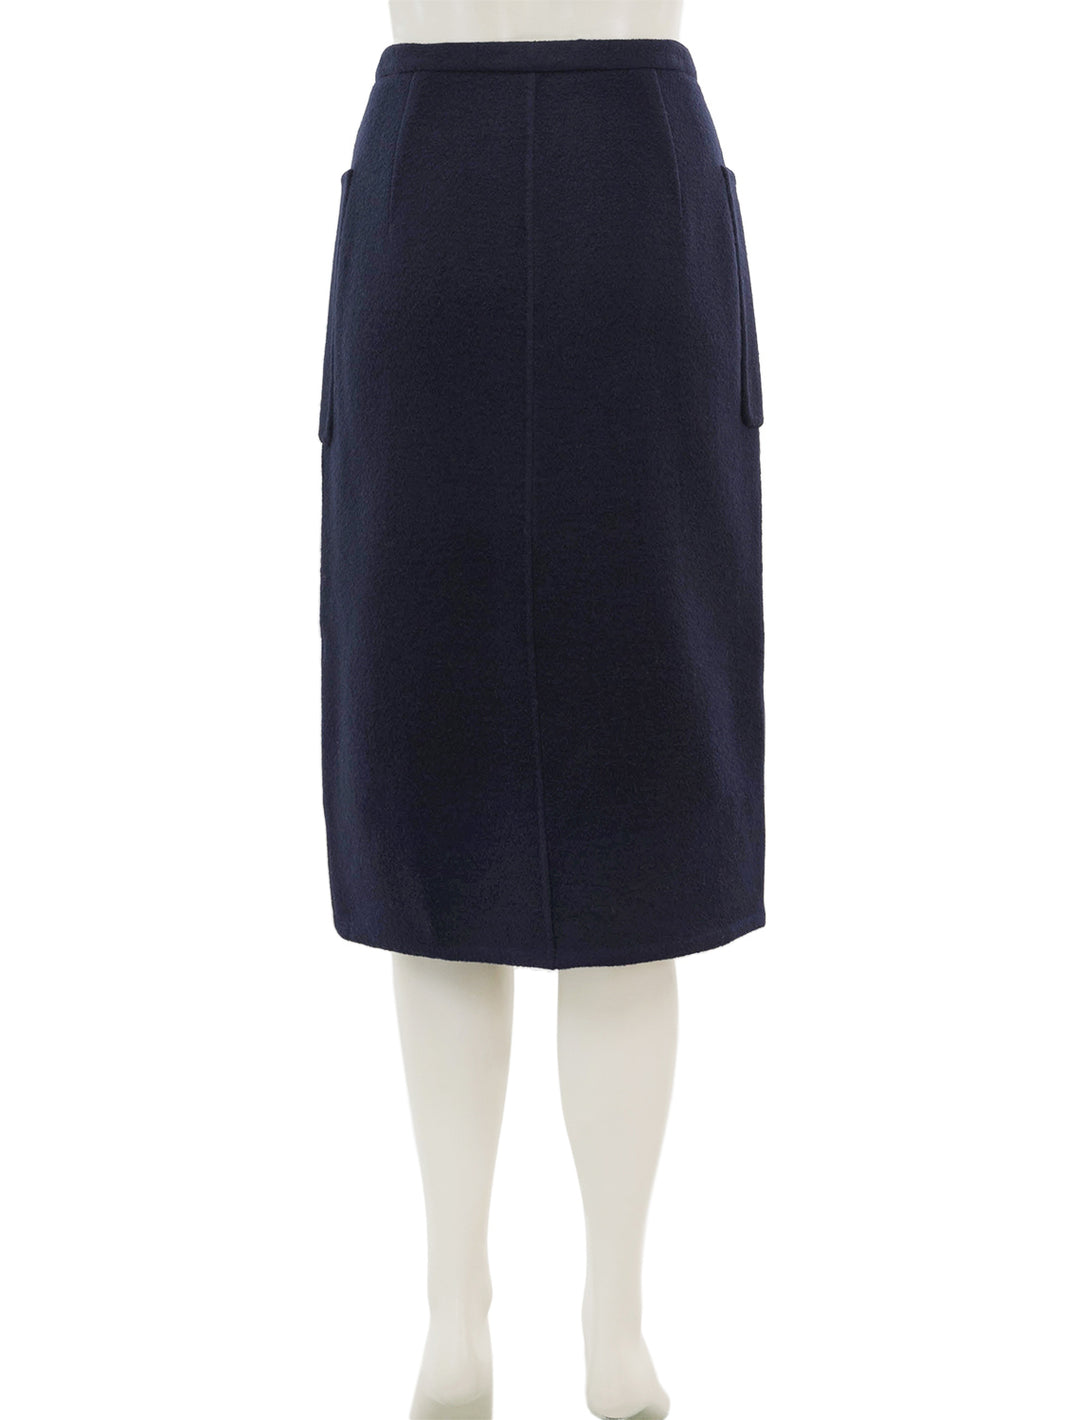 Back view of Vince's brushed wool pencil skirt in deep caspian.